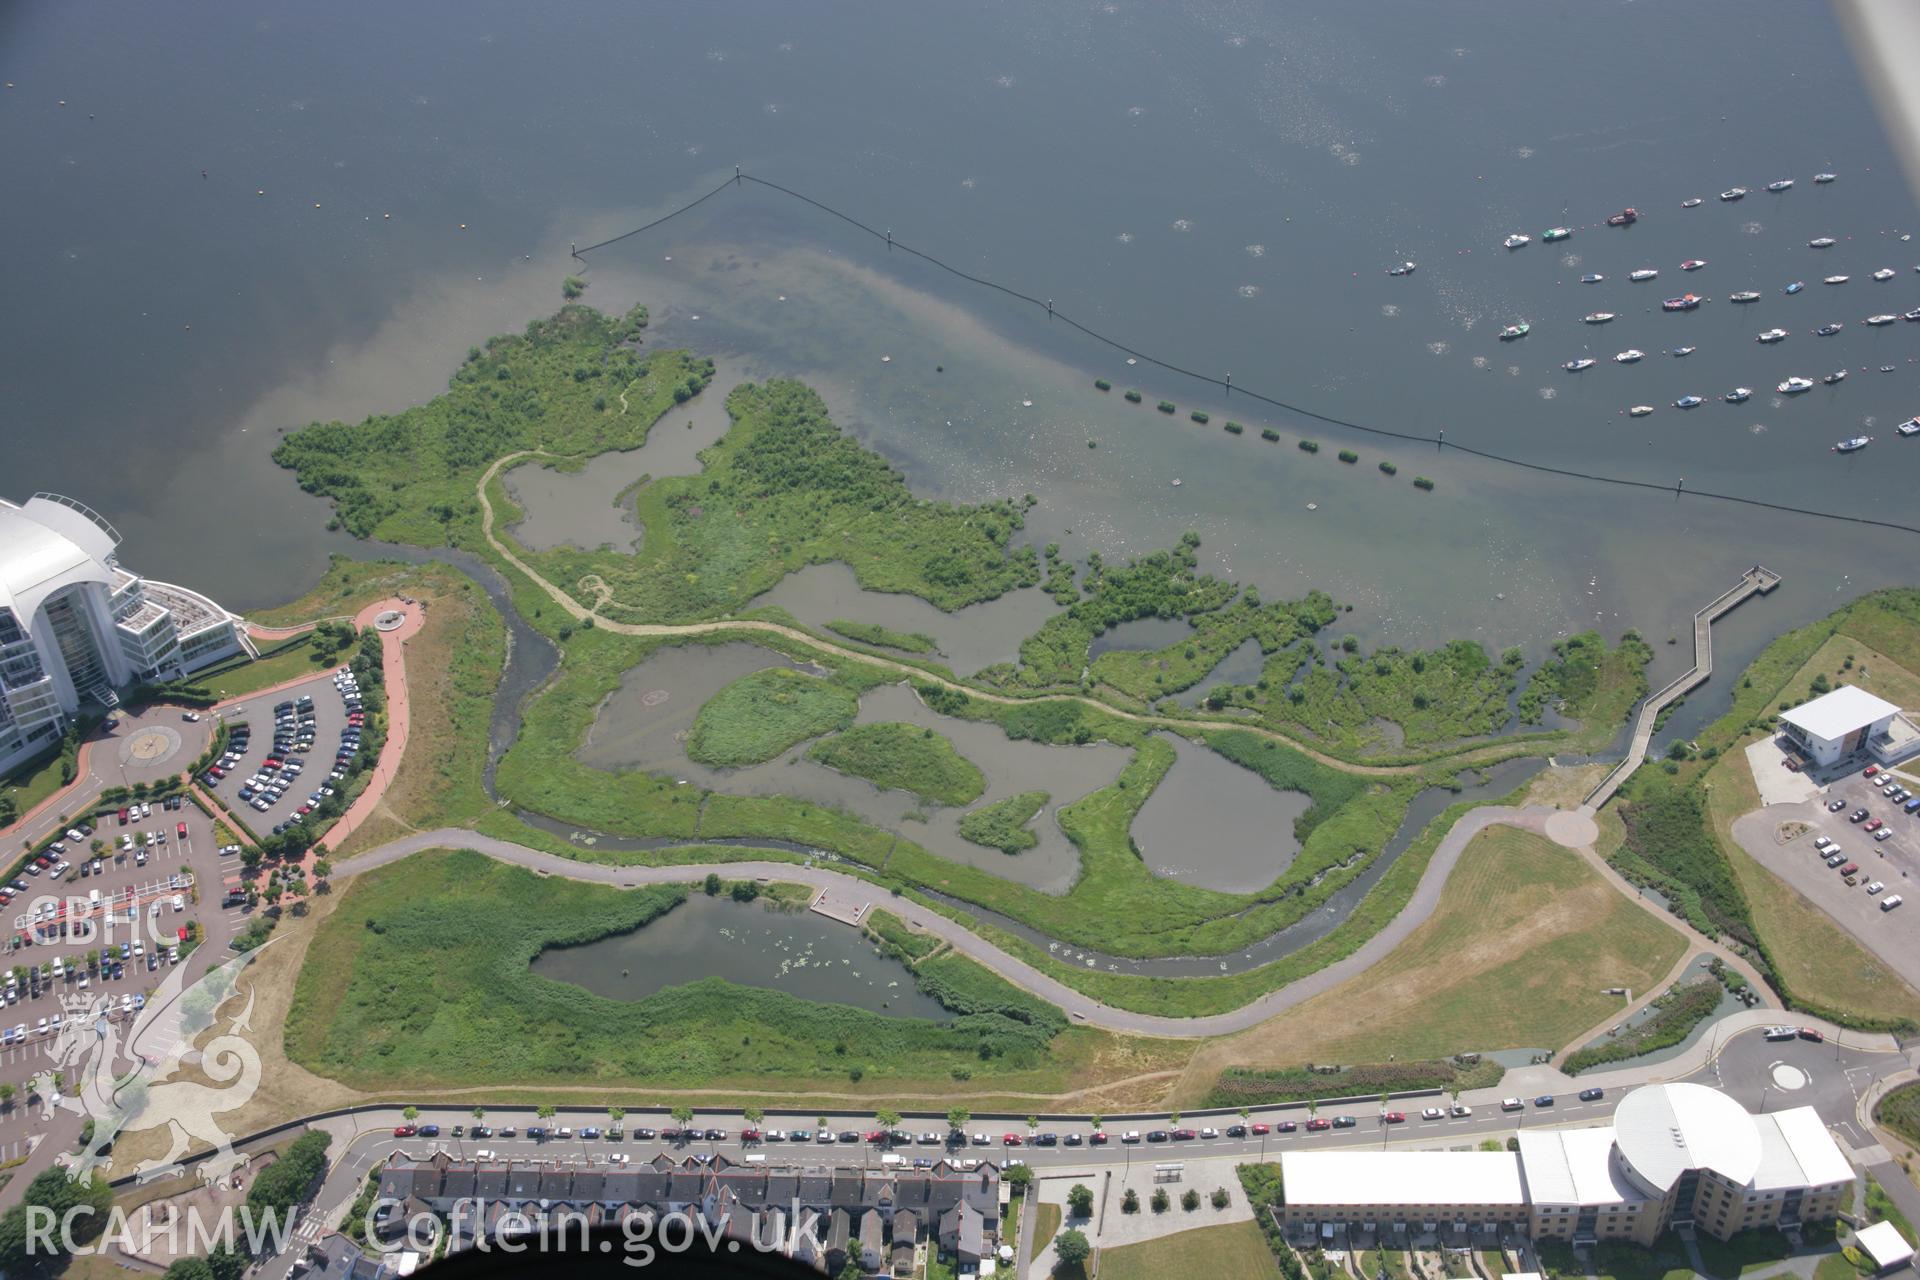 RCAHMW colour oblique photograph of Cardiff Bay, salt marshes and nature reserve. Taken by Toby Driver on 29/06/2006.